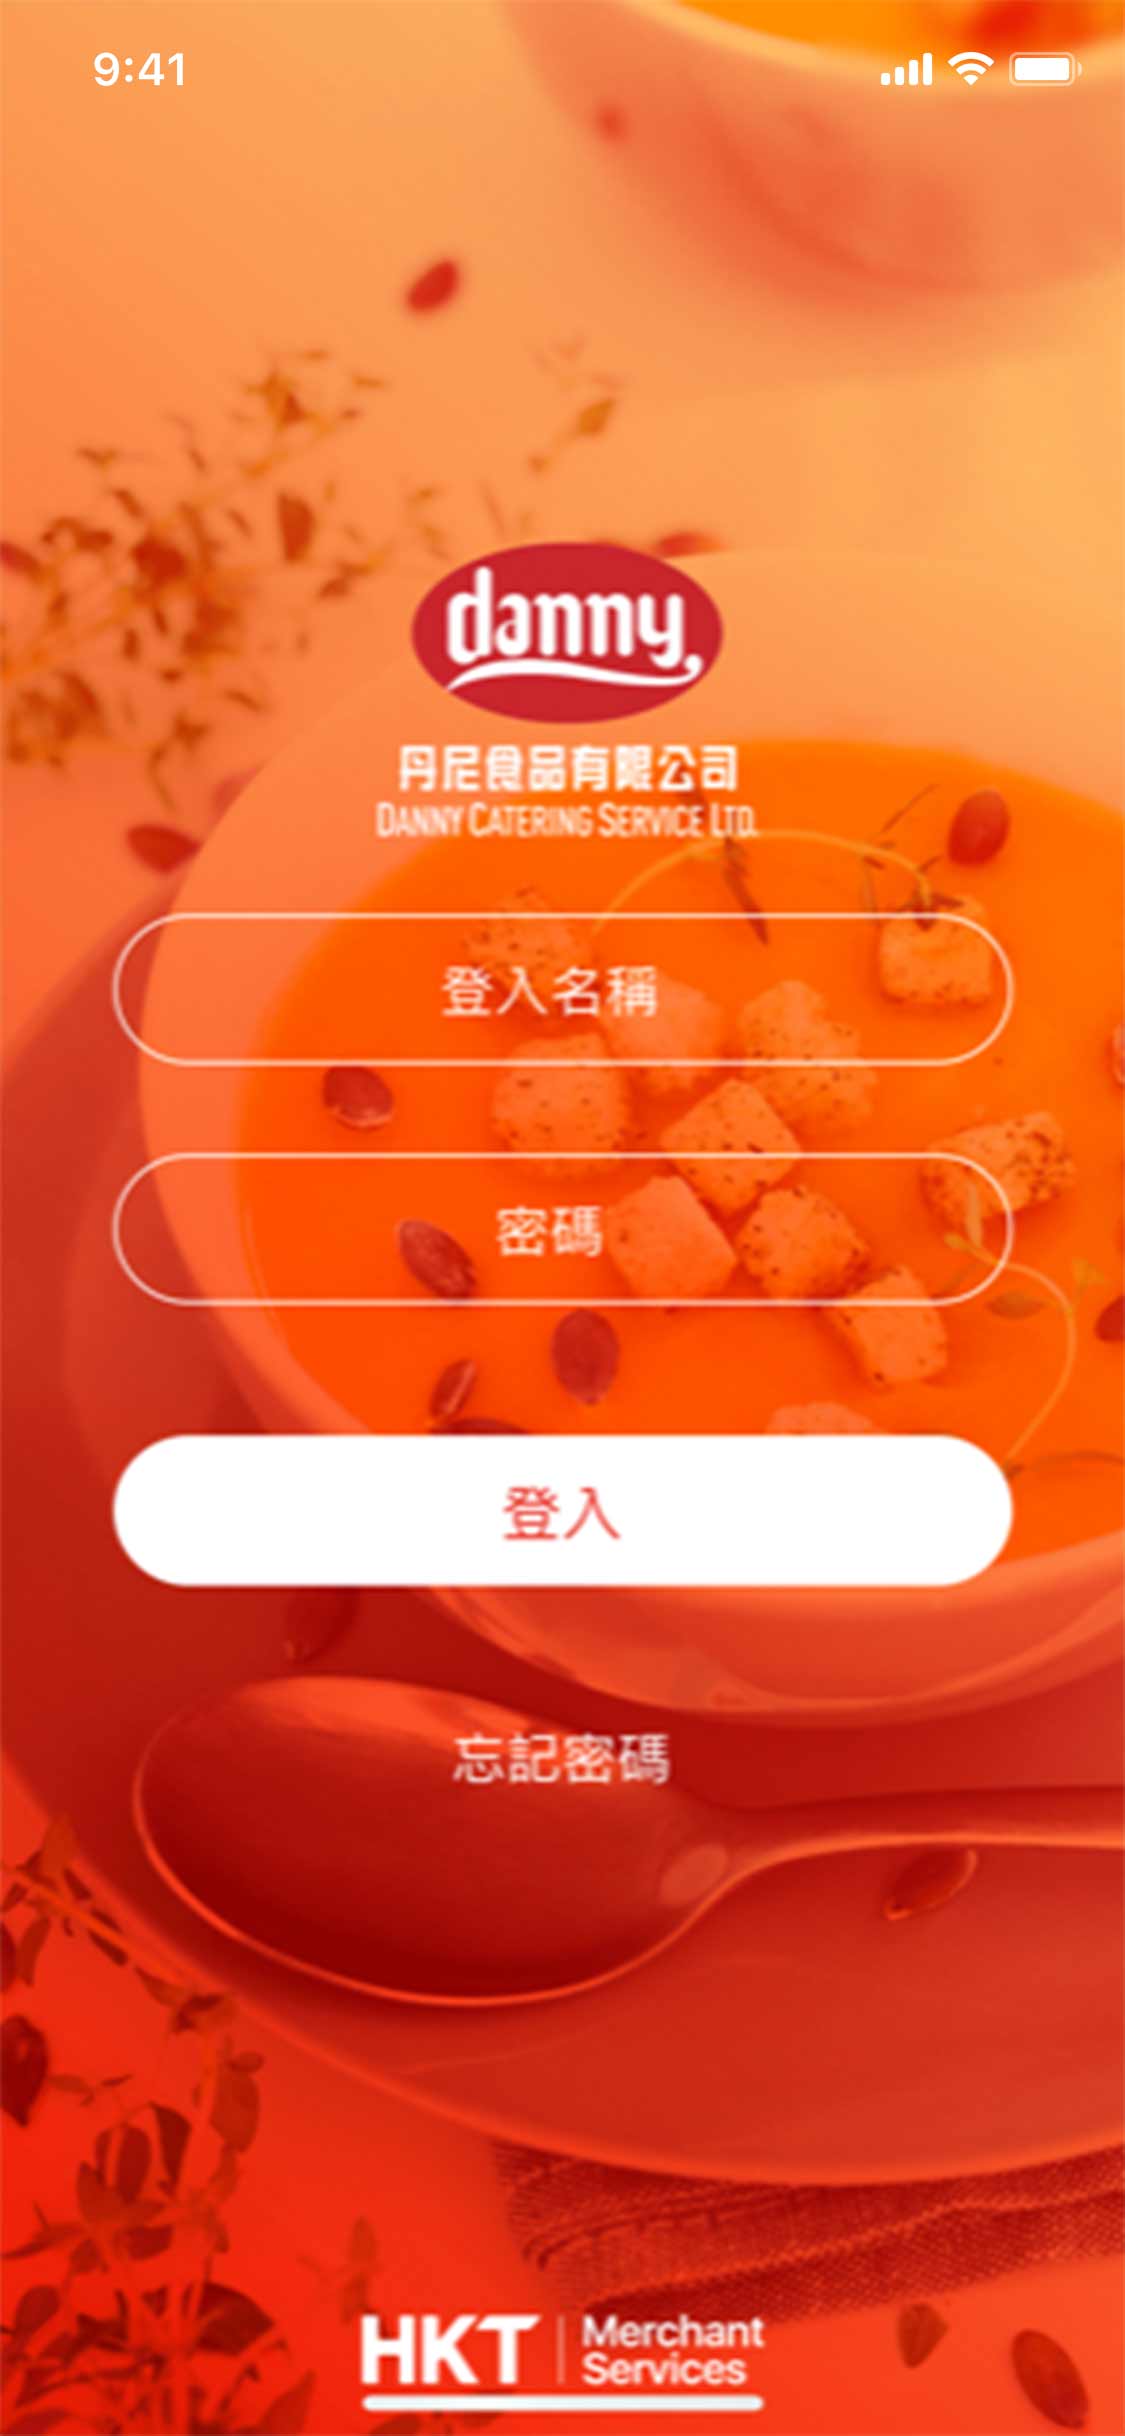 Log in to 'Danny Catering by HKT'